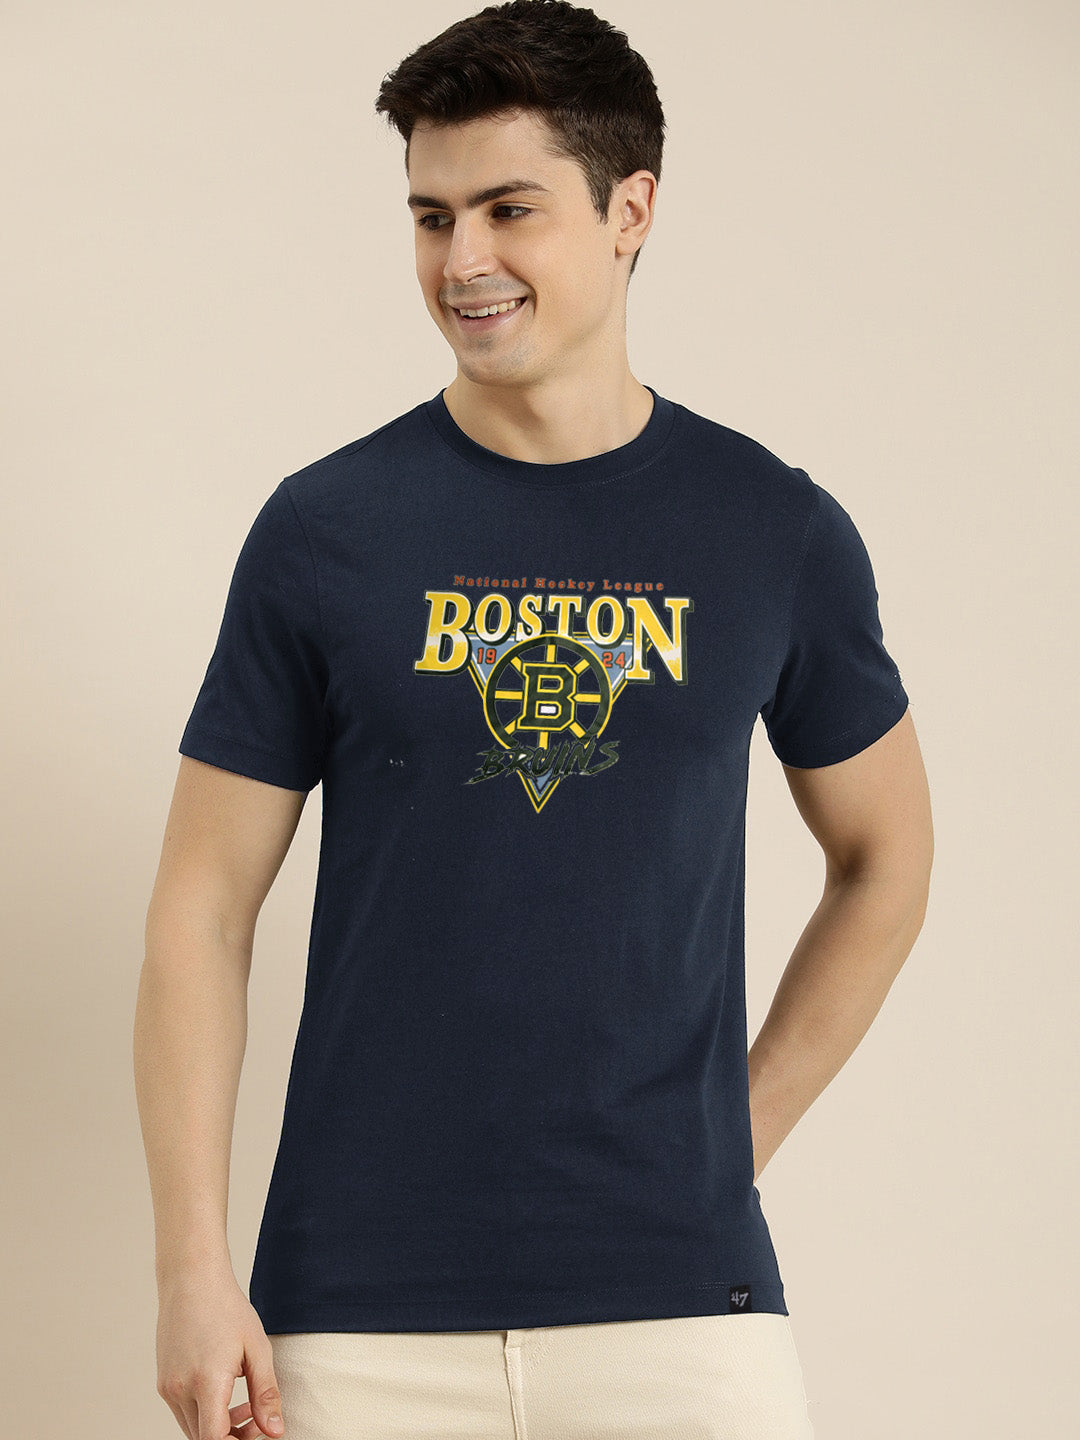 47 Single Jersey Crew Neck Tee Shirt For Men-Navy with Print-BE905/BR13167